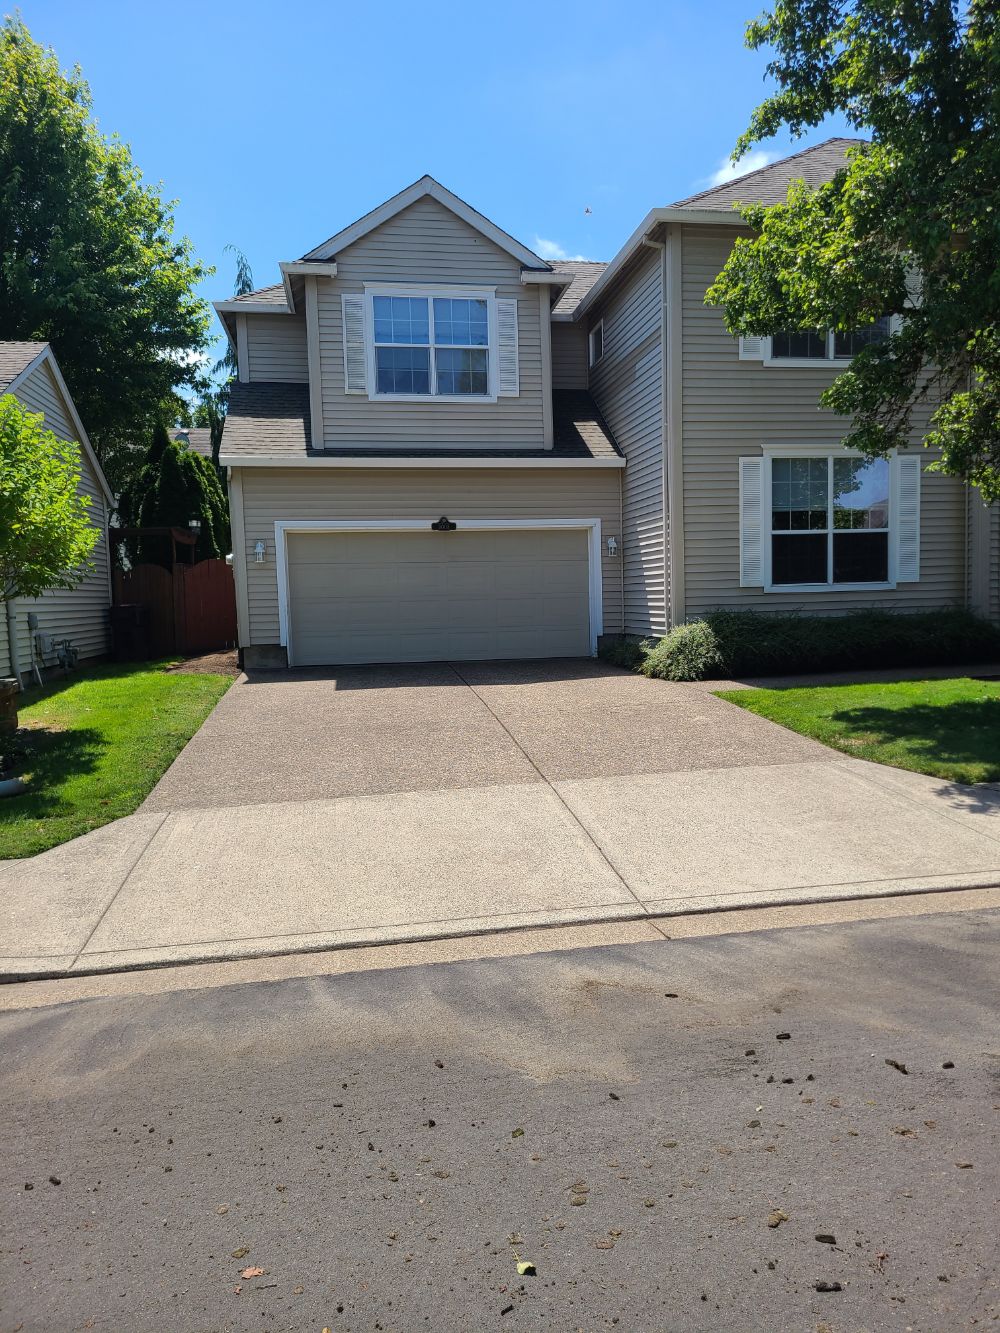 Driveway pressure washing in tigard or